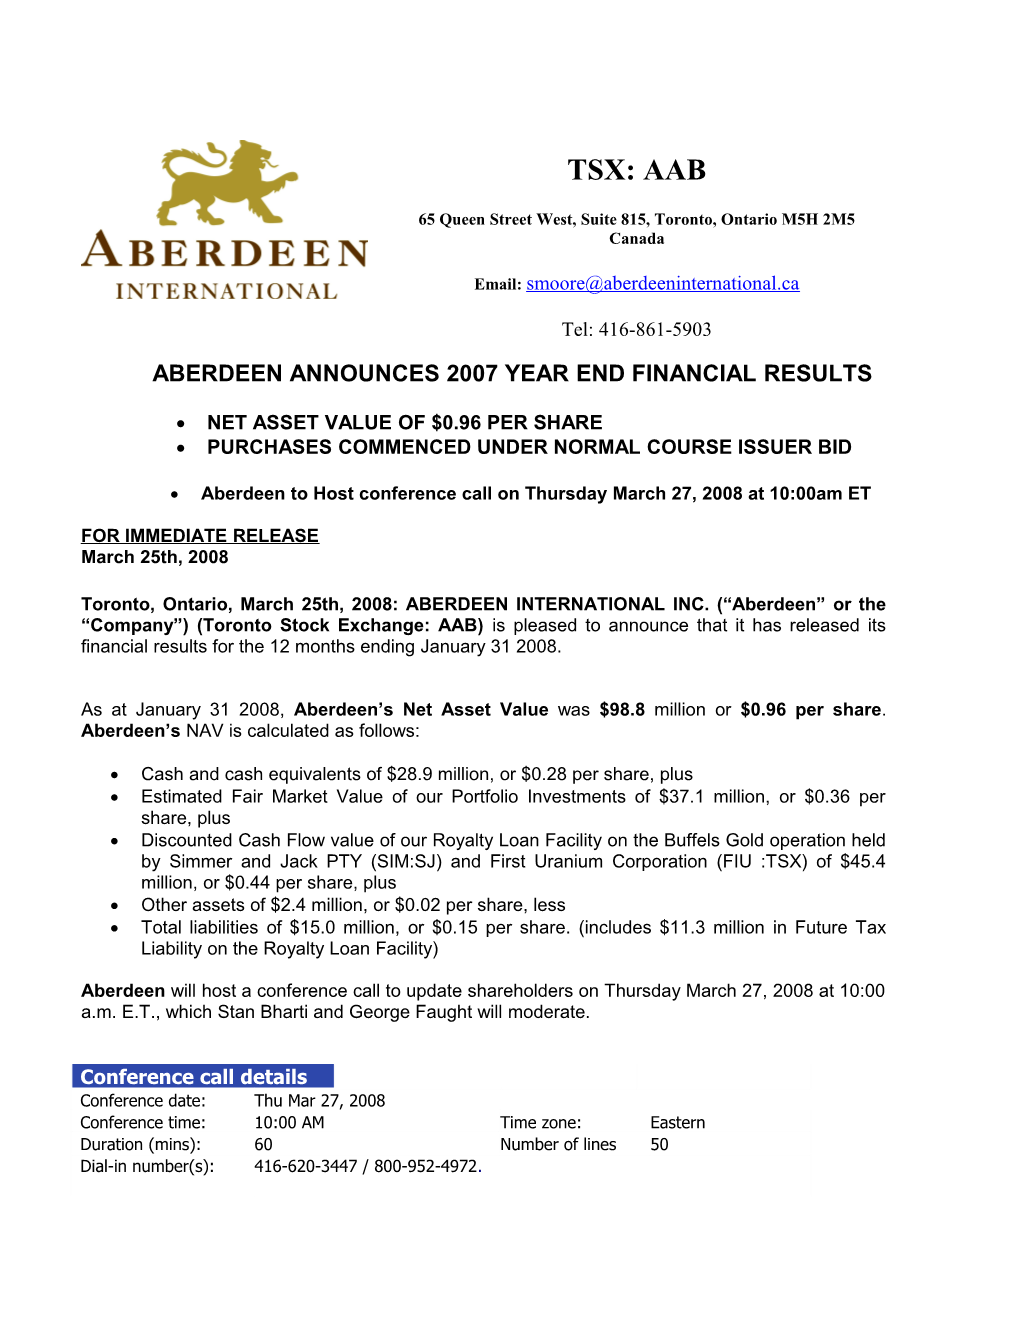 Aberdeenannounces 2007 Year End Financial Results